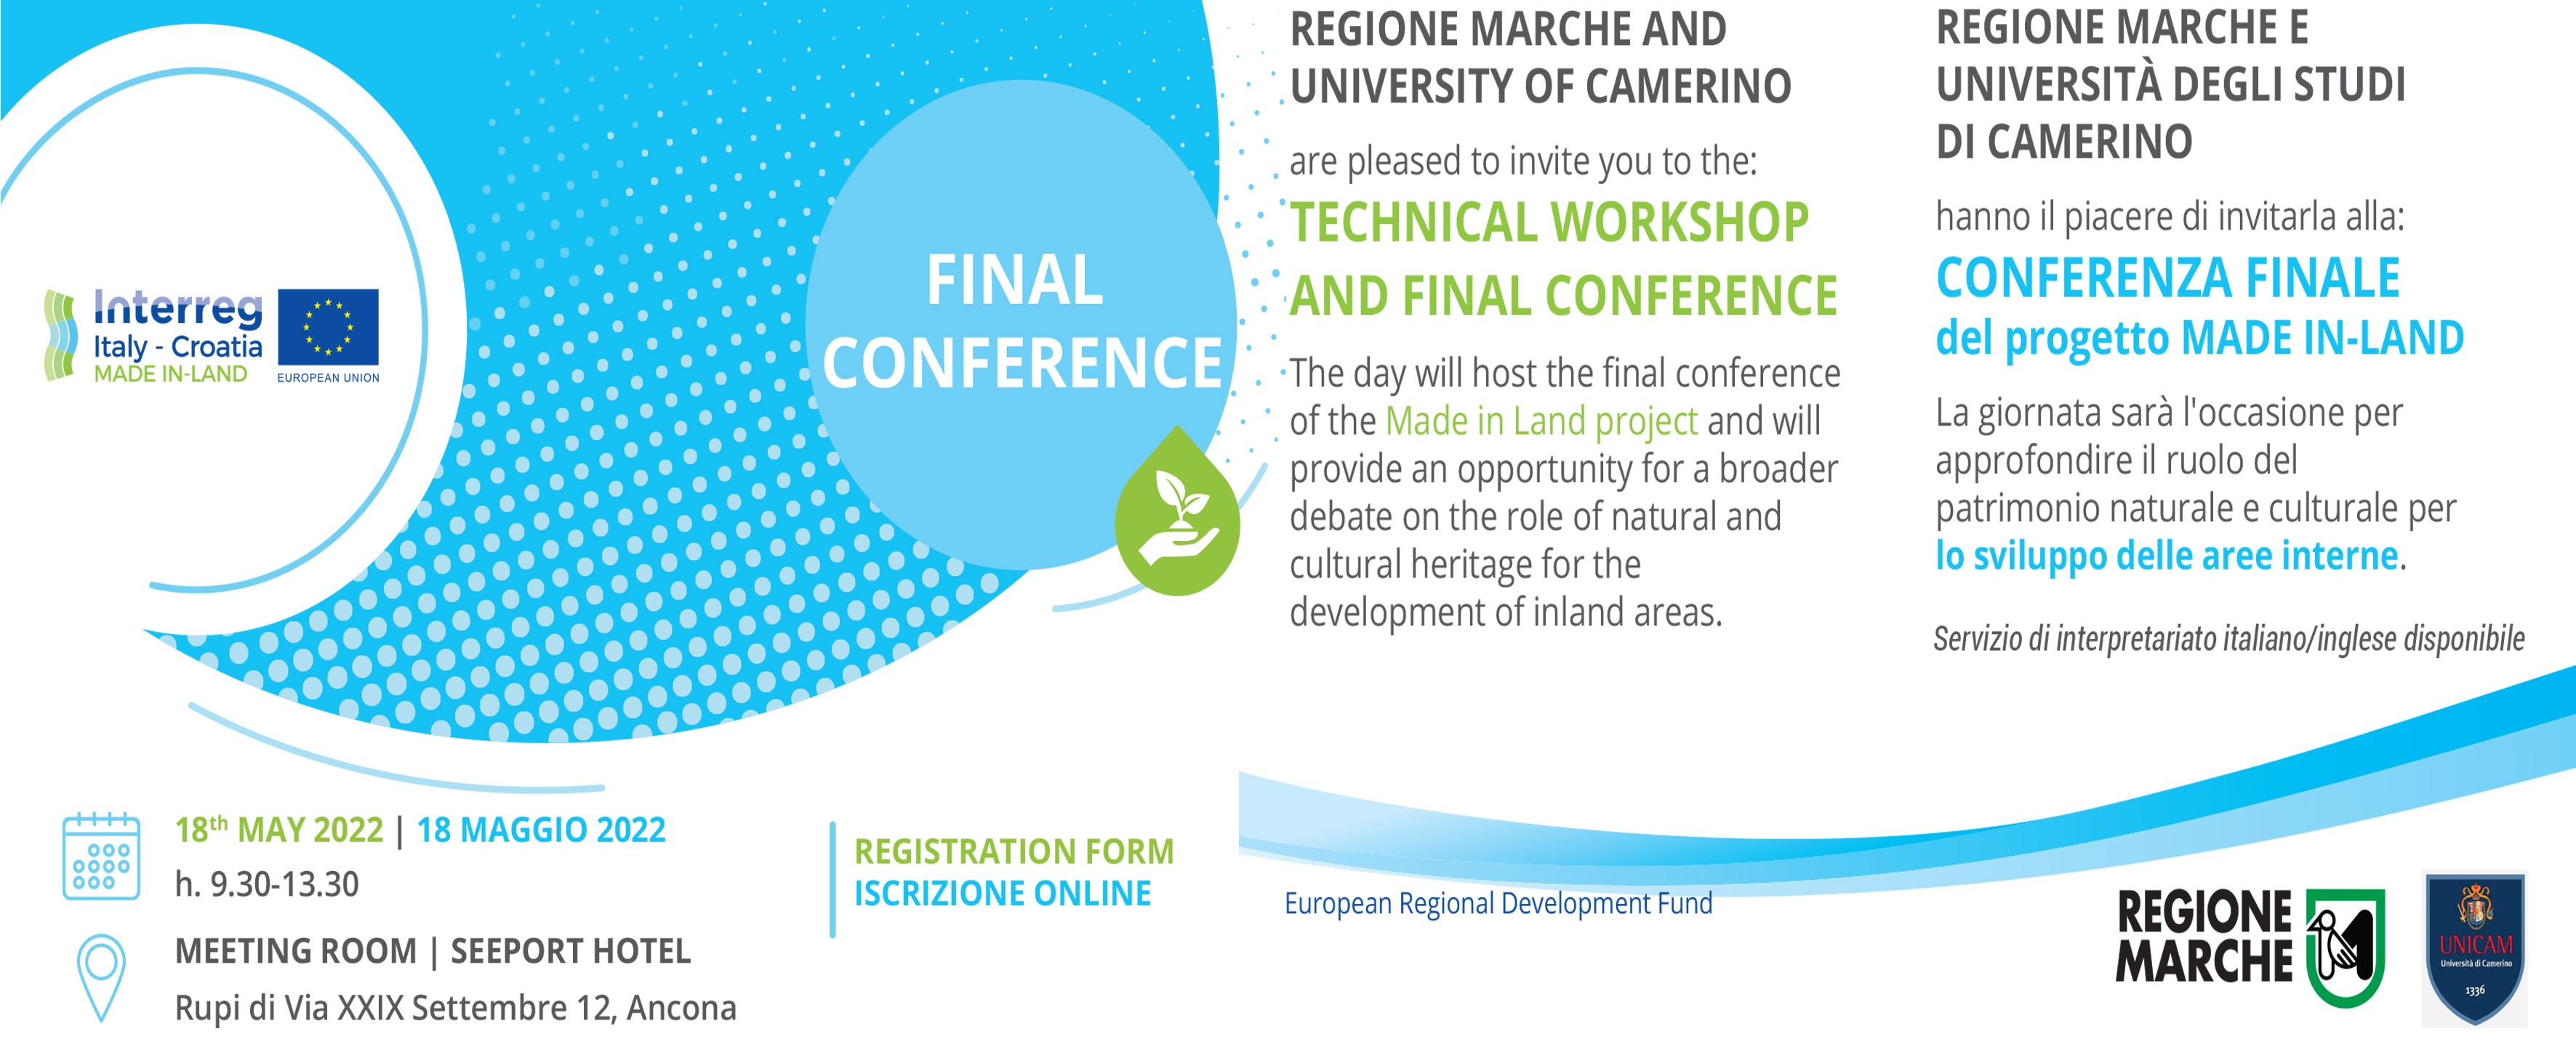 Technical Workshop & Final Conference of Made In-Land project